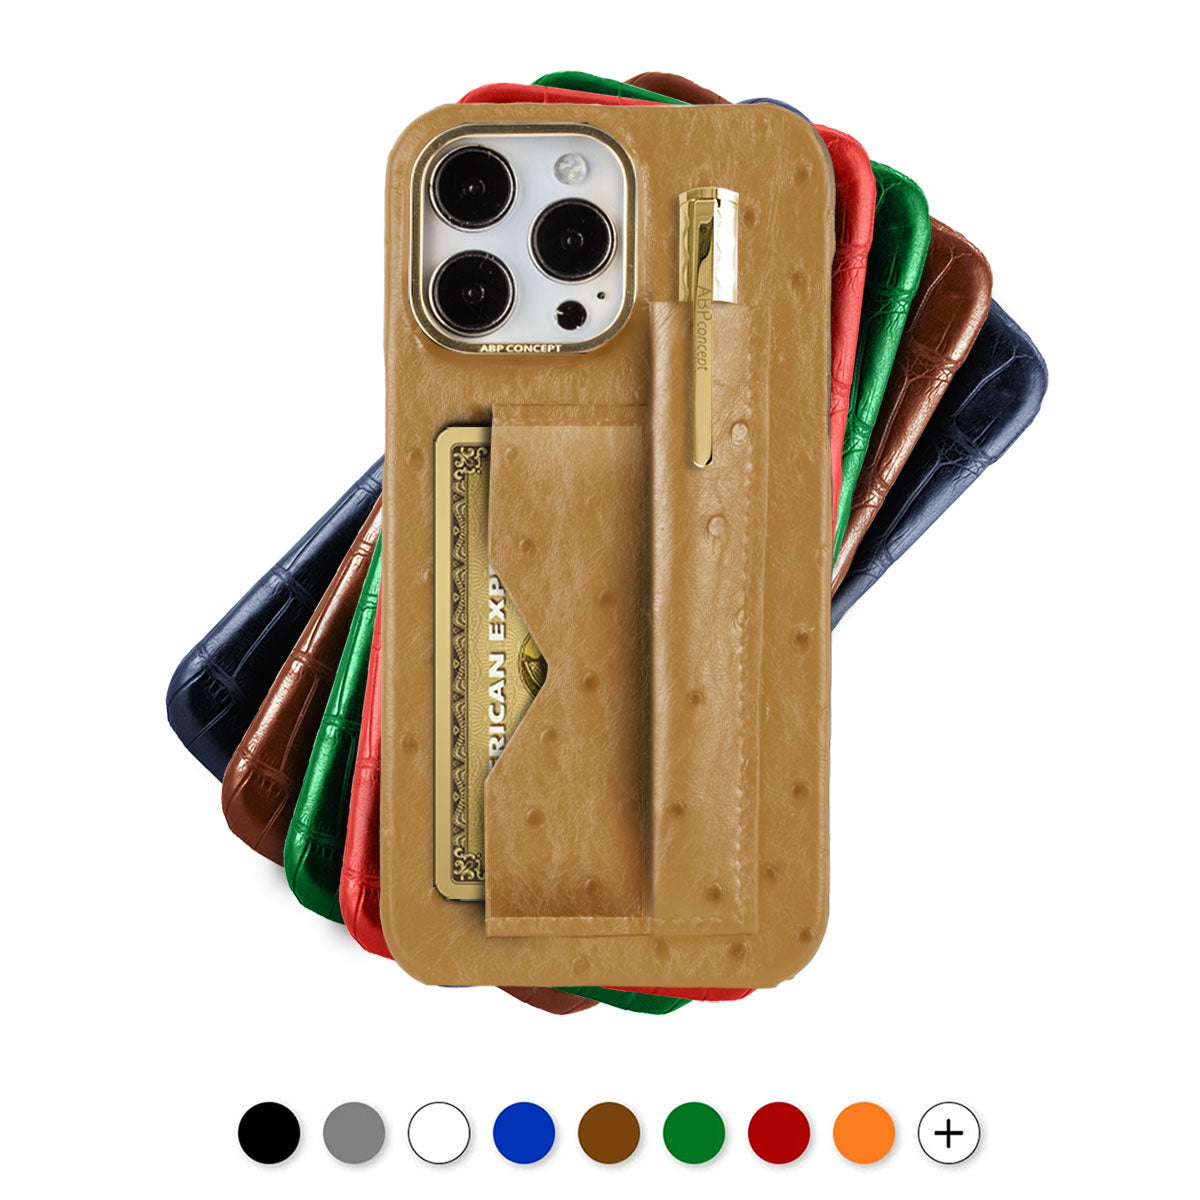 Leather iPhone "Business case" / cover with credit card pocket and ball pen - iPhone 15, 14 & 13 Pro Max - Genuine ostrich